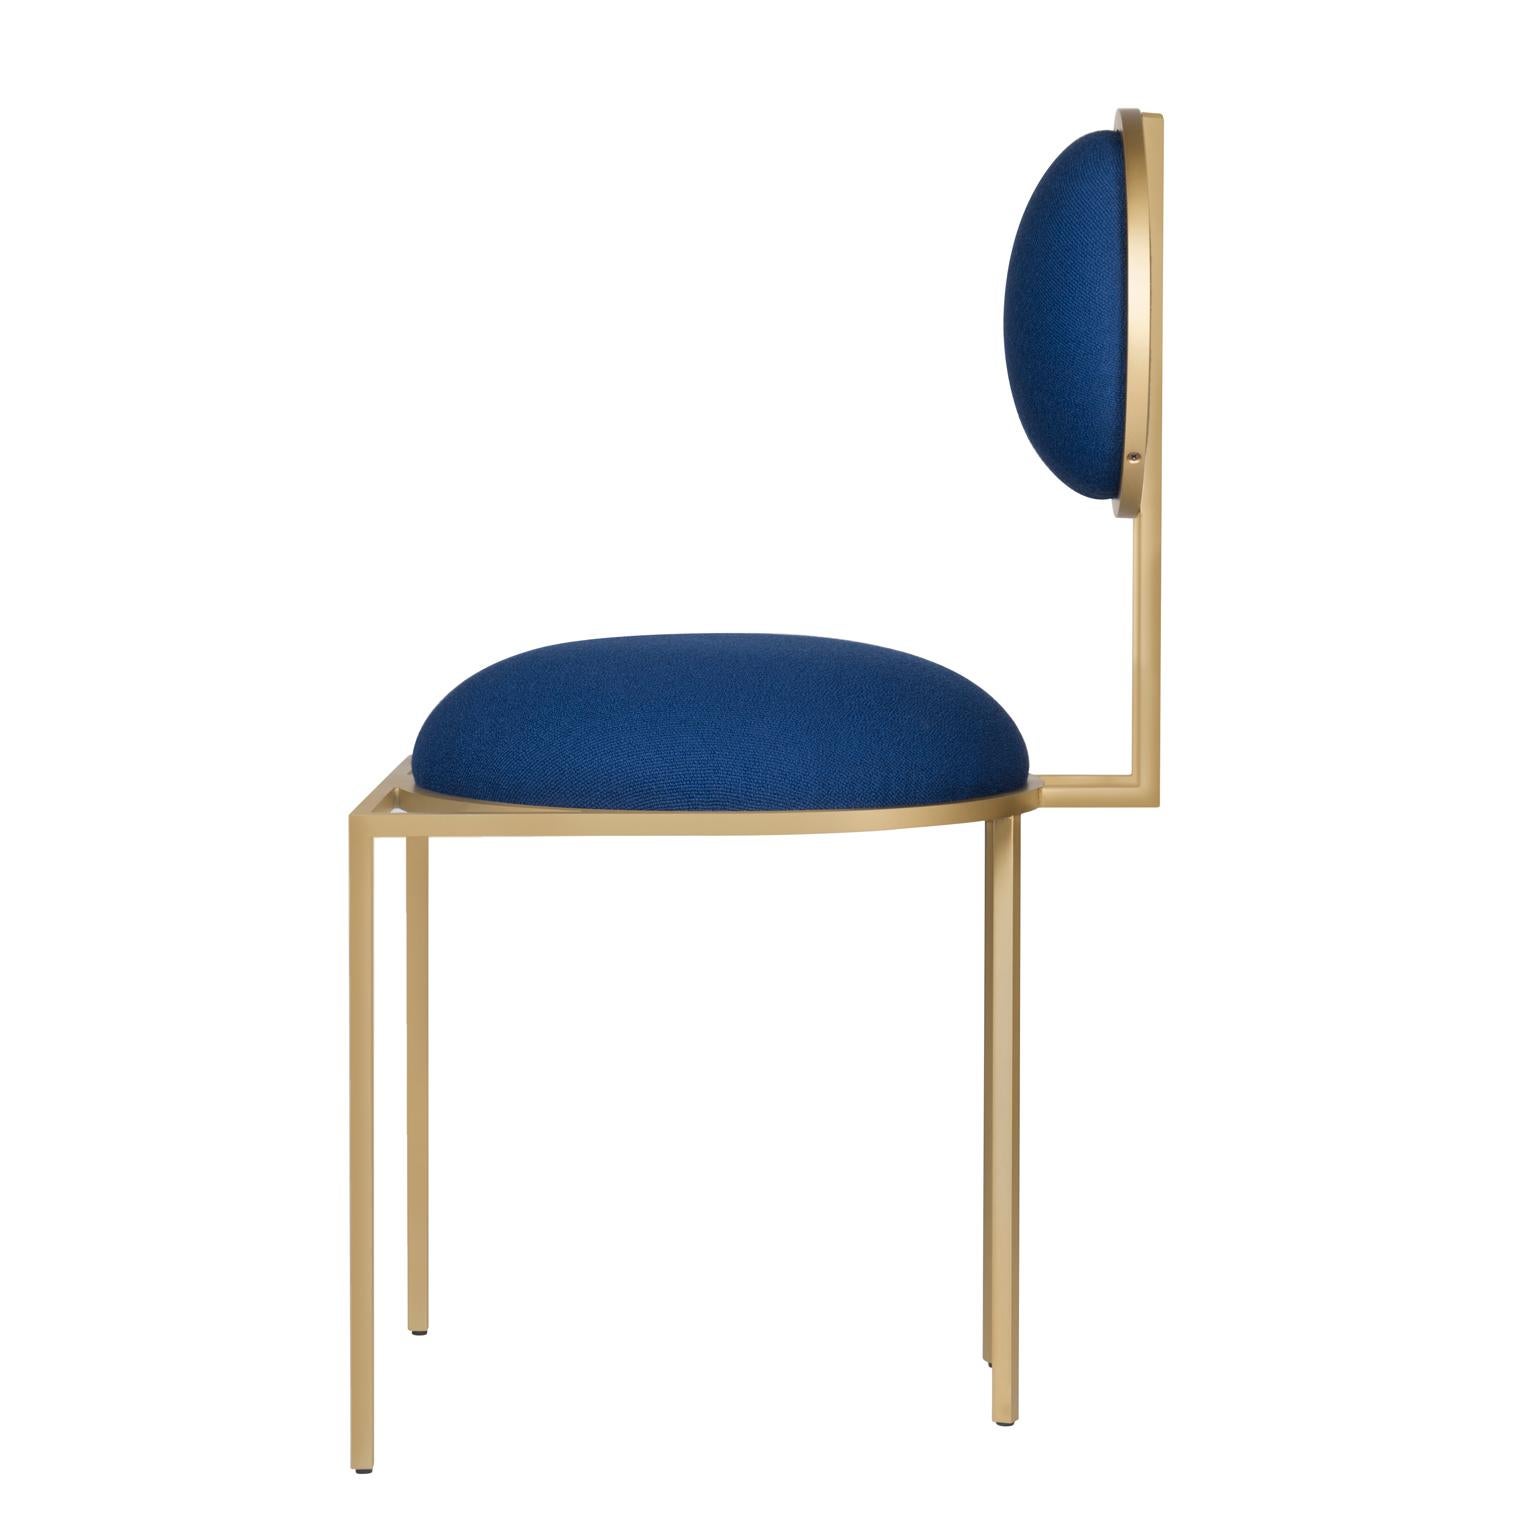 Modern Orbit Dining Chair in Blue Wool Fabric, Brushed Brass, by Lara Bohinc For Sale